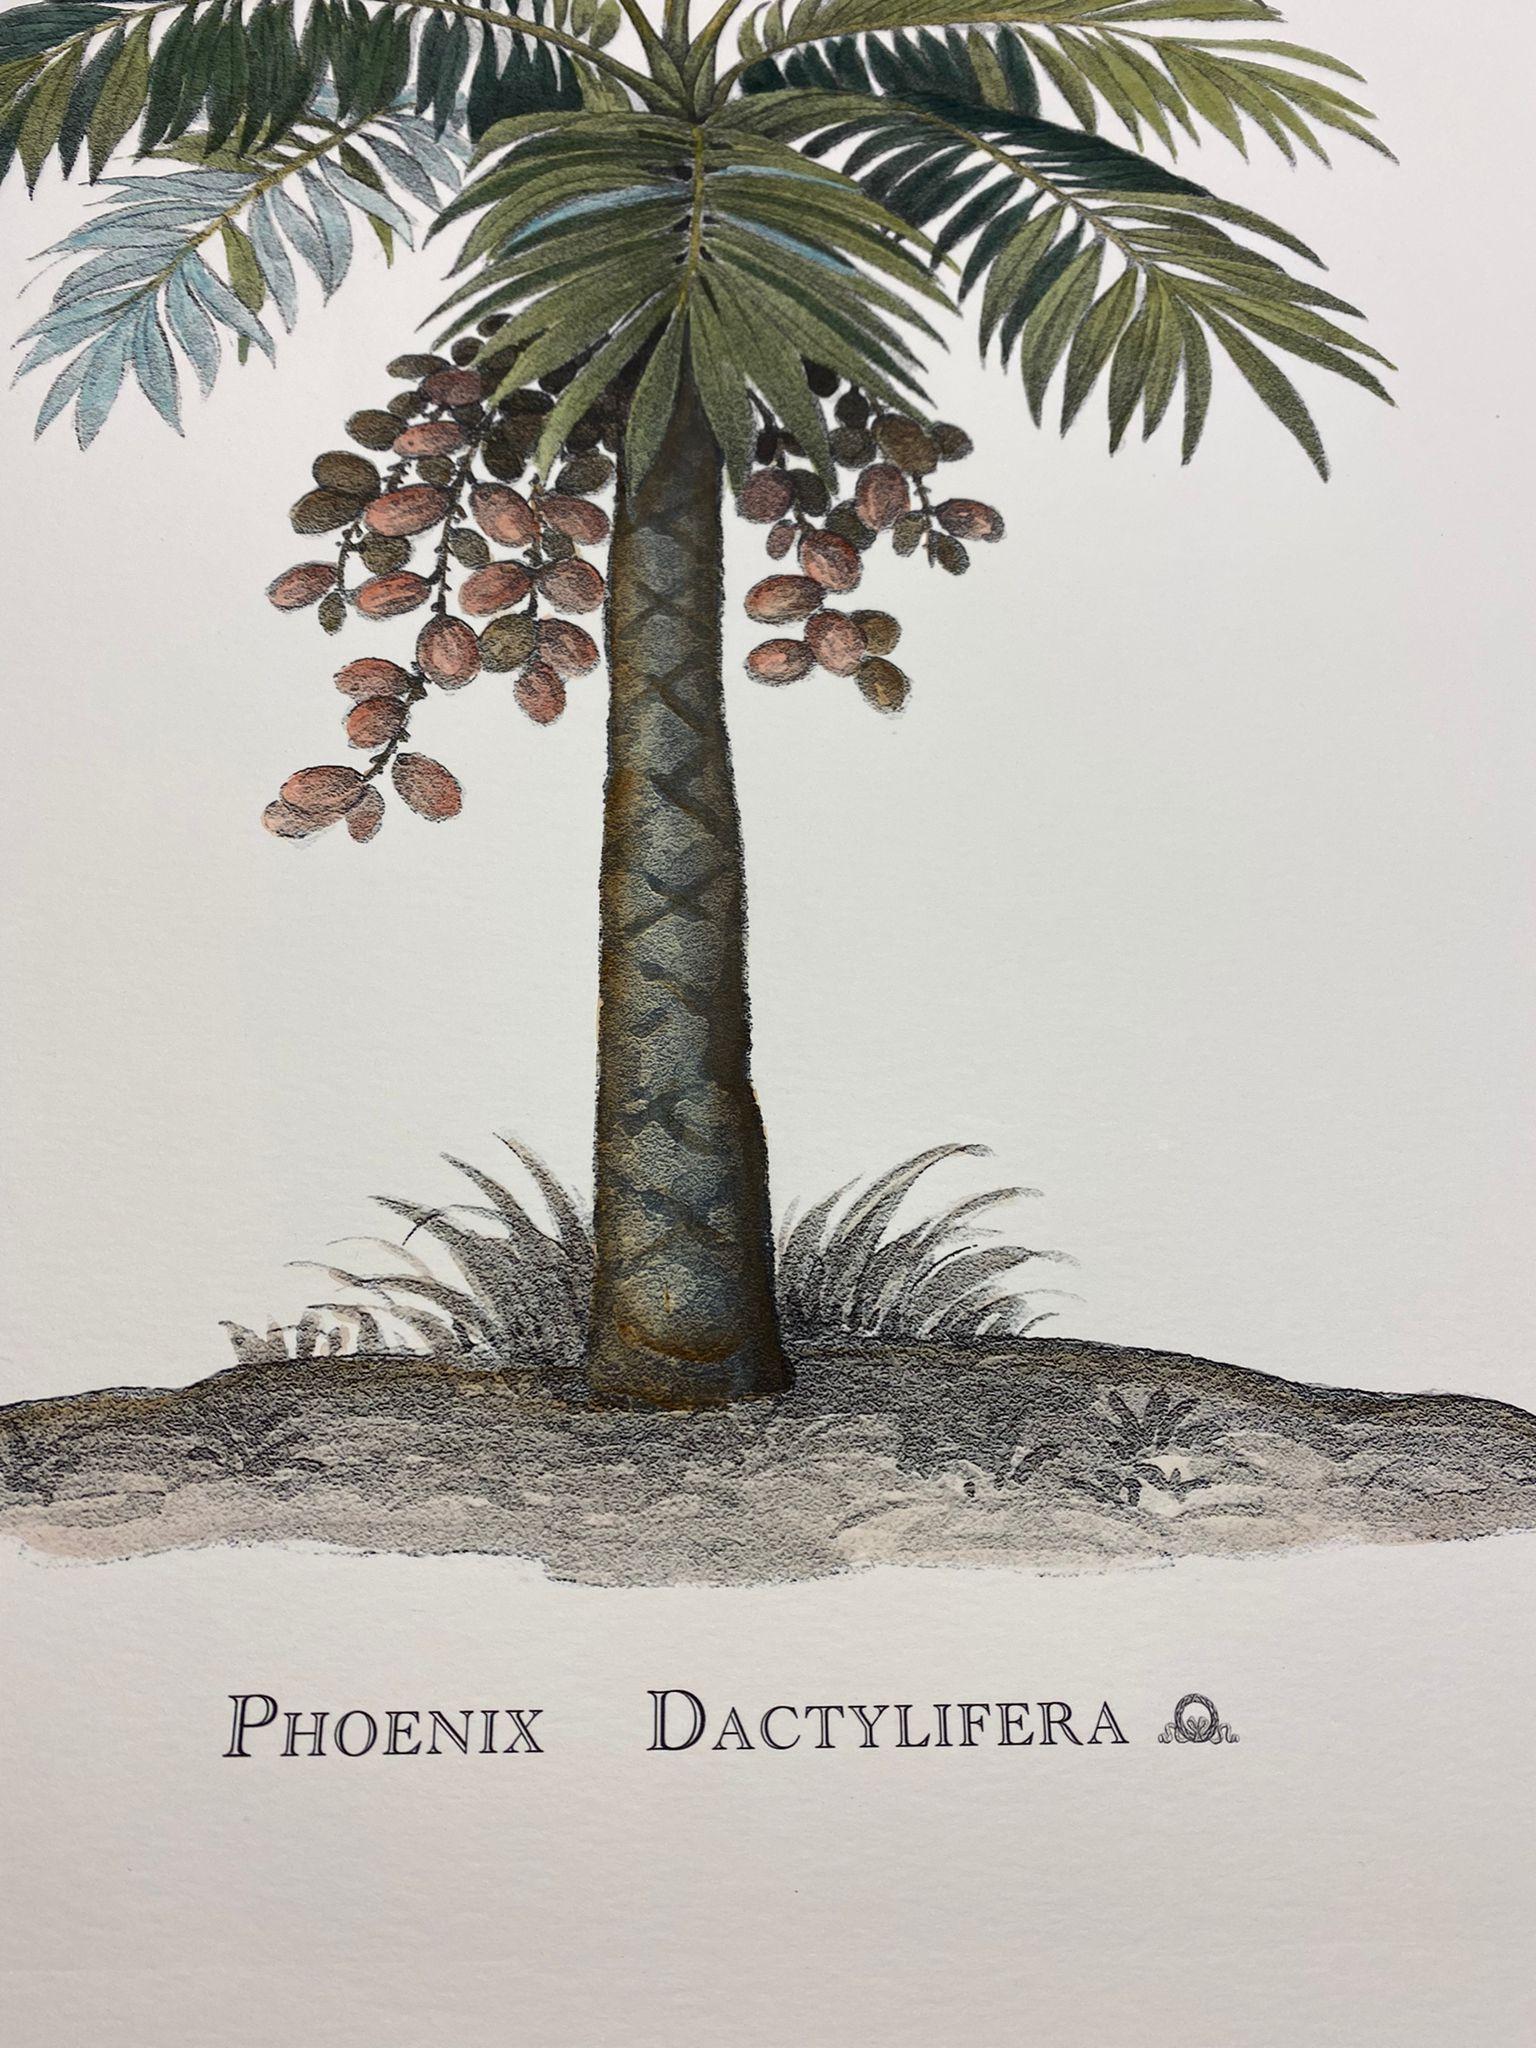 Elegant hand-watercoloured print representing Phoenix Dactylifera, of the palms family.

This botanical style print is available in 4 different natural representations to create a bright and joyful composition:
- Musa Paradisiaca
- Butia Capitata
-